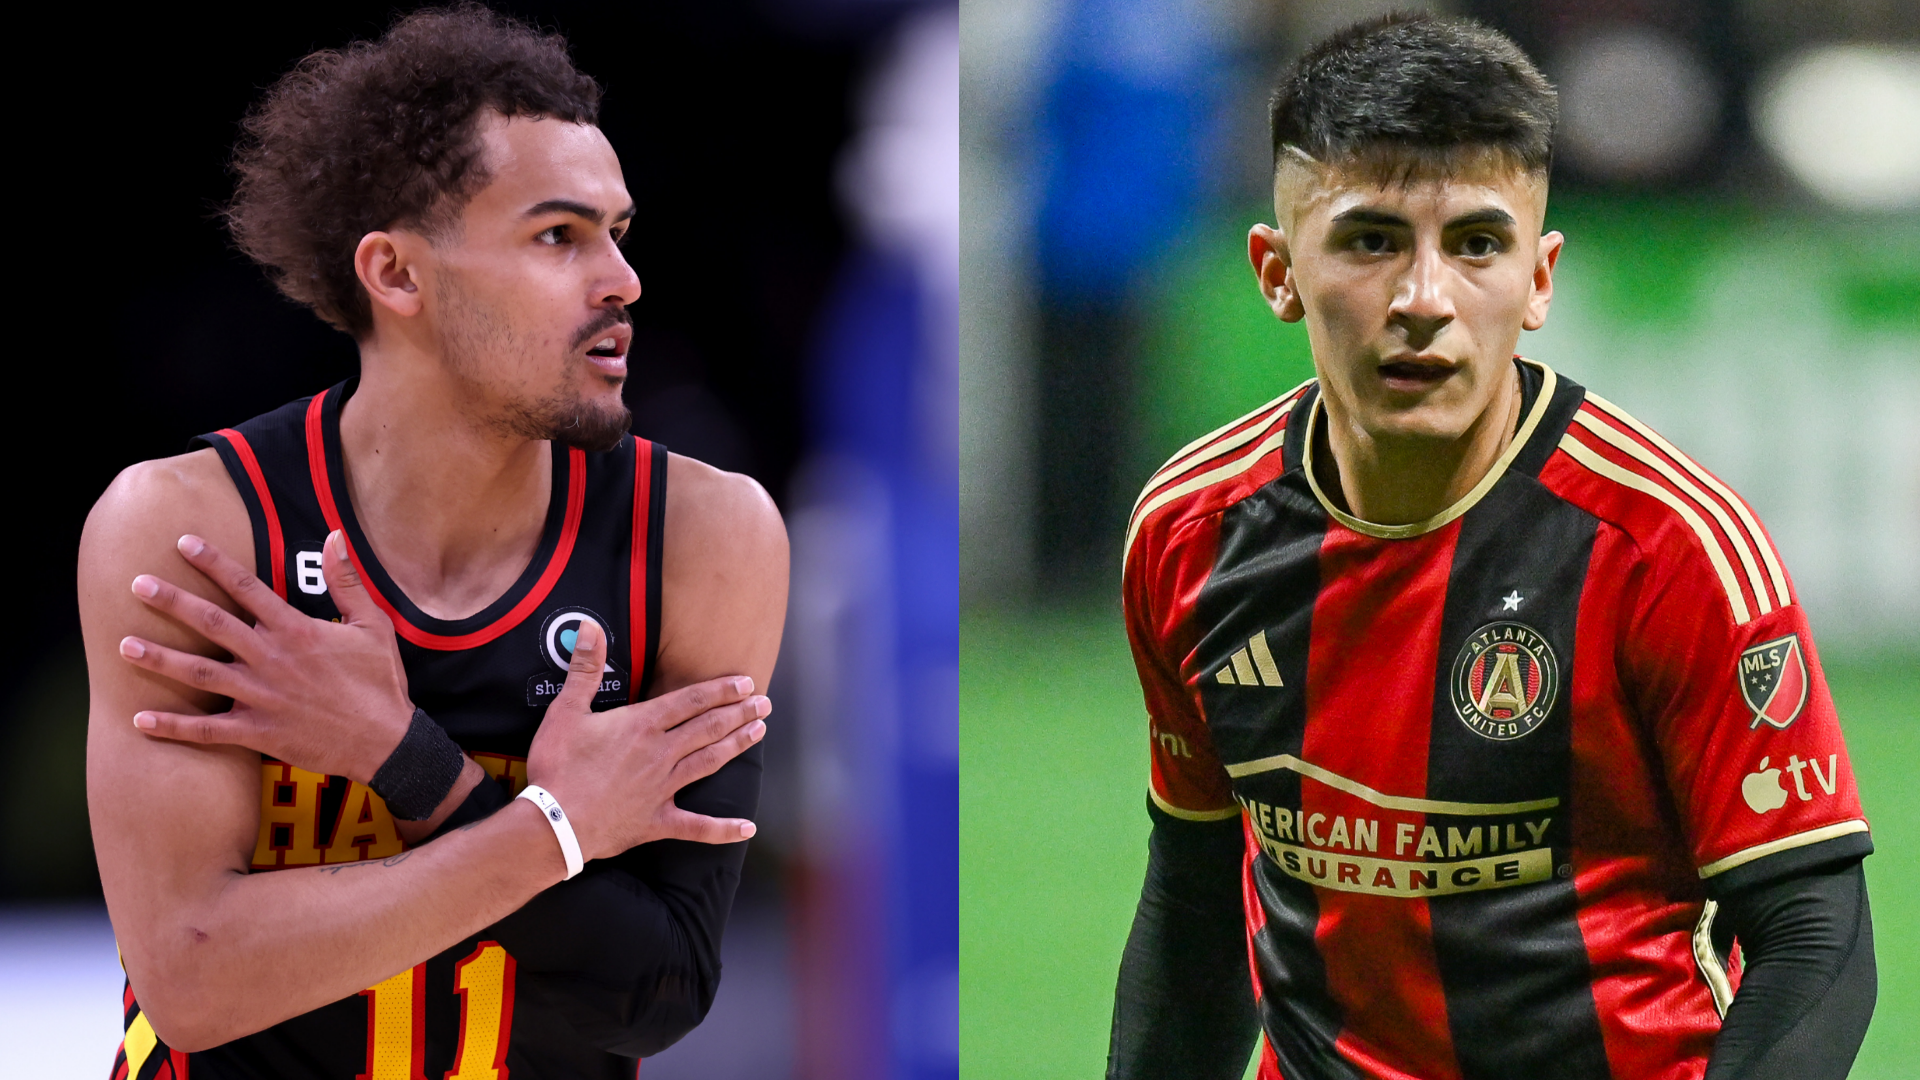 ‘Atlanta embraces every sport’ – NBA star Trae Young impressed by ‘great crowd’ at United soccer game | Goal.com US